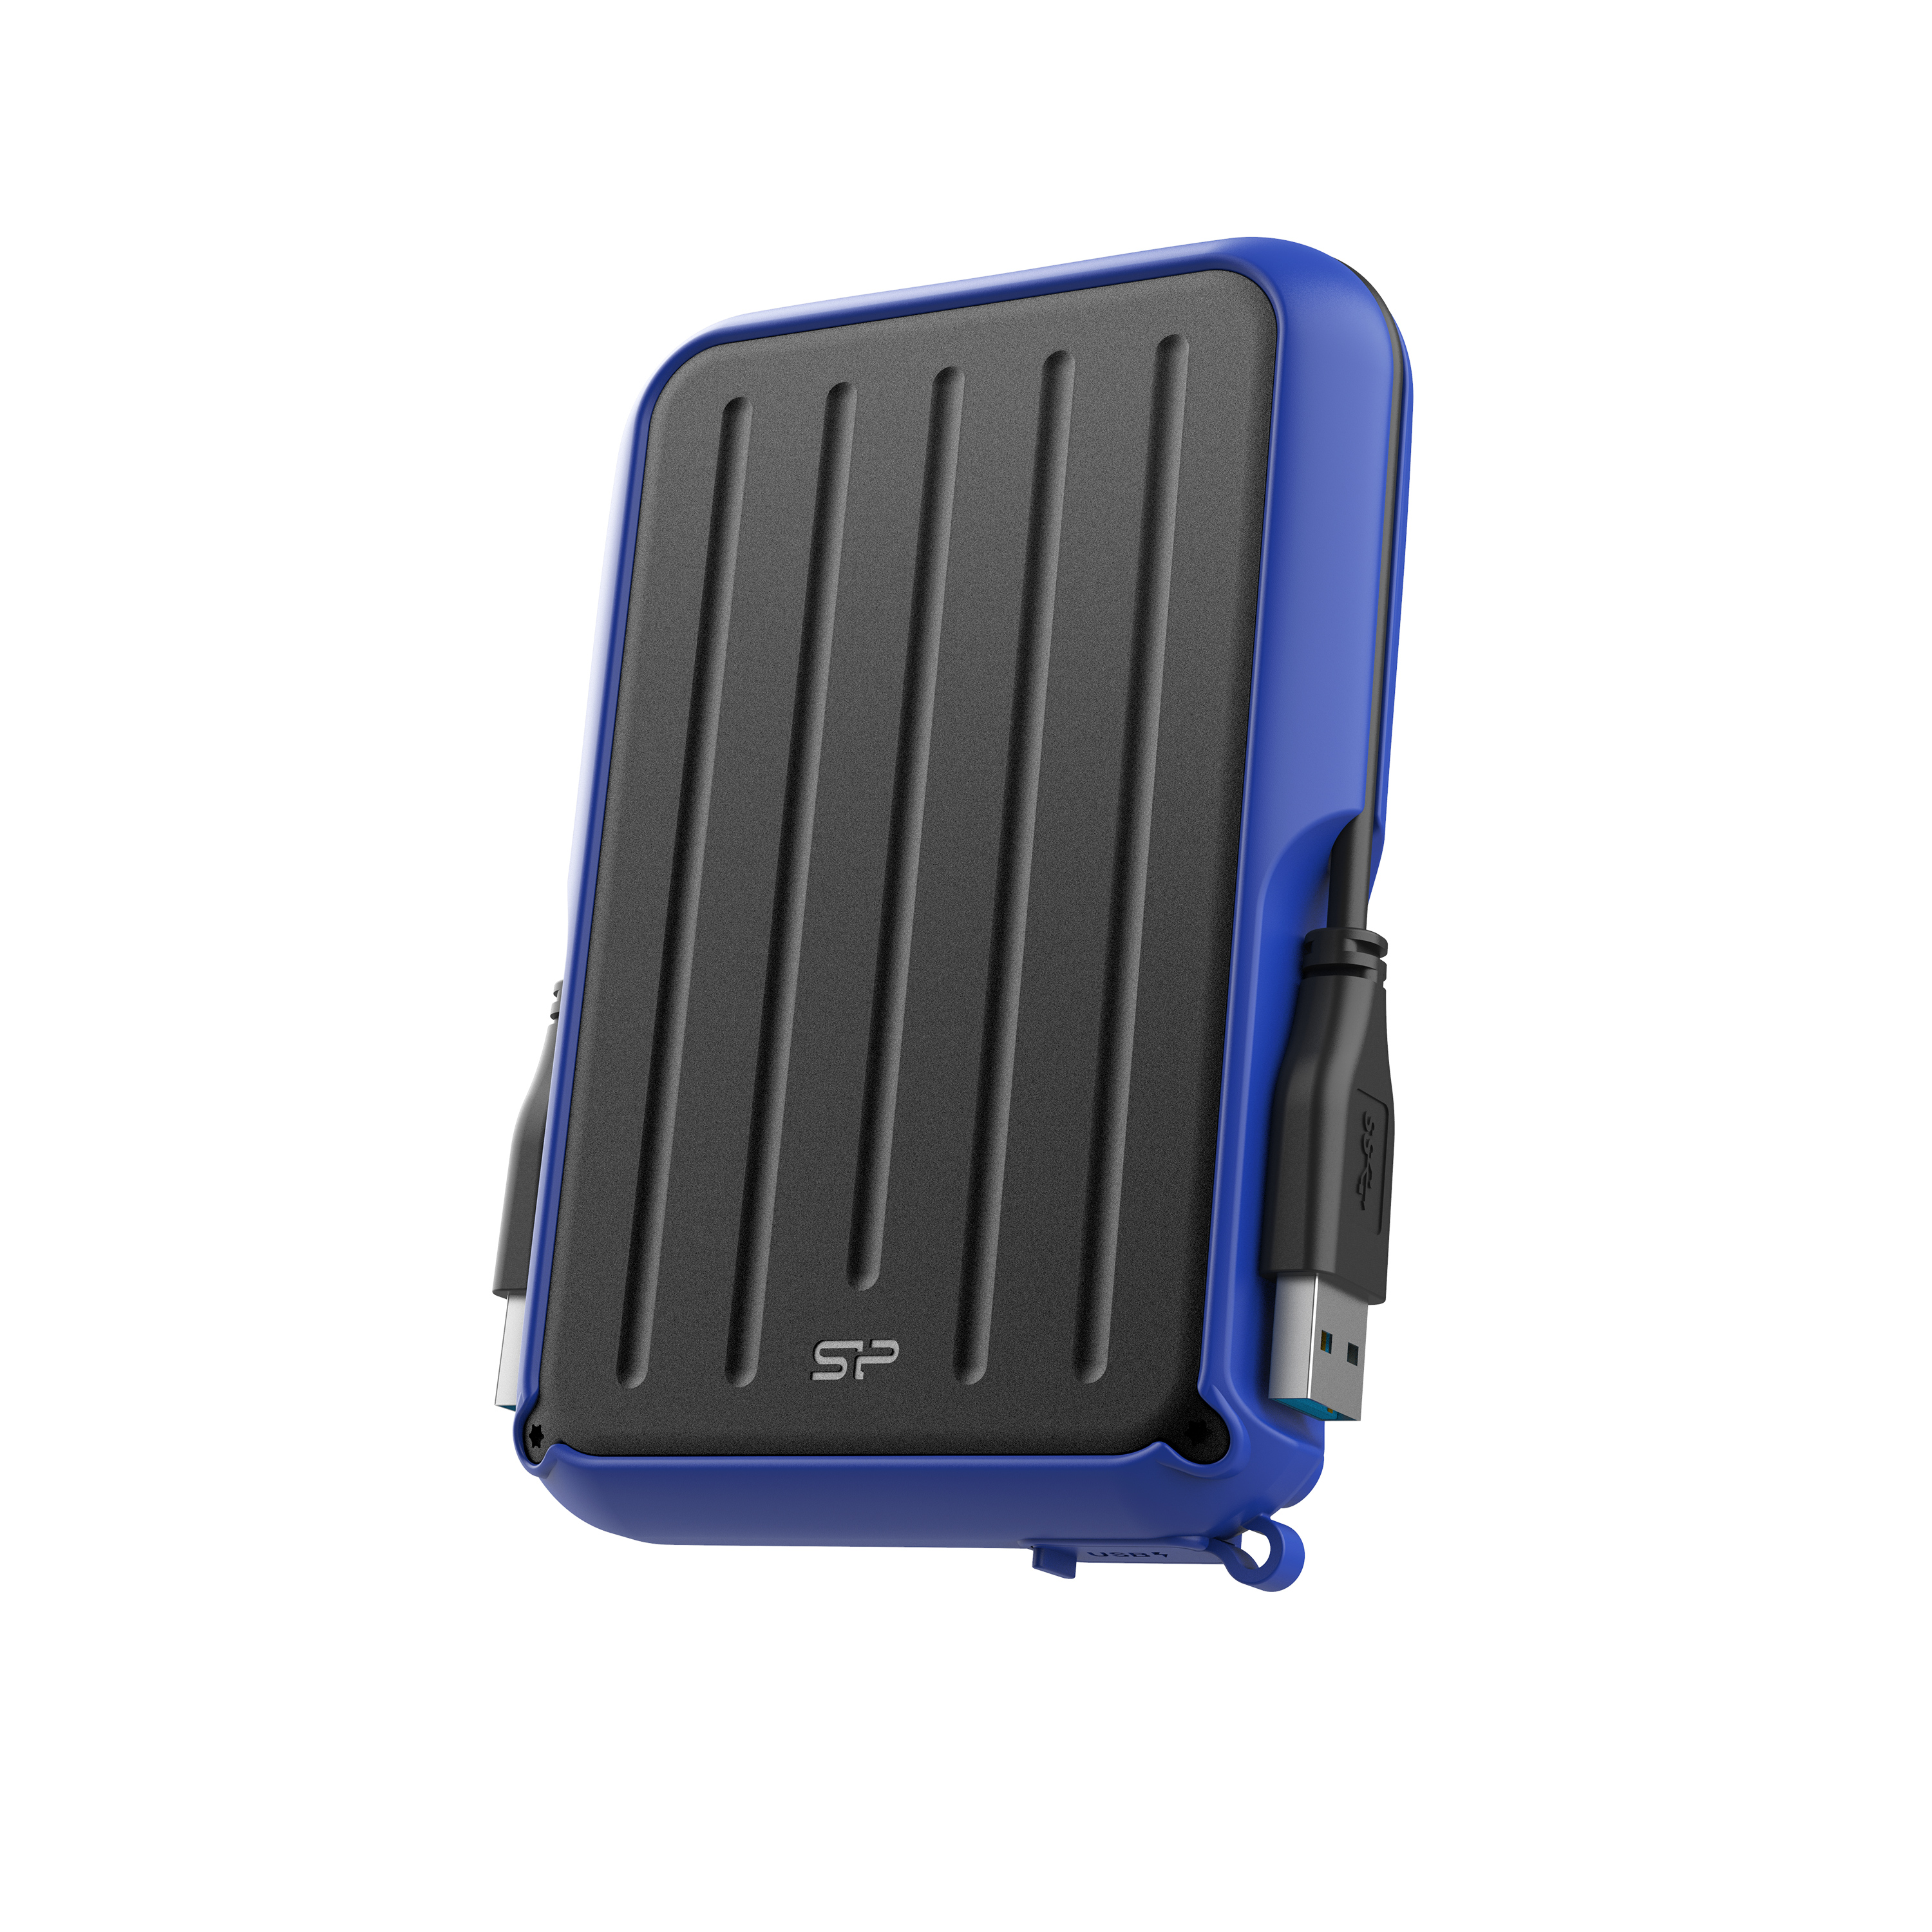 Silicon Power 1TB A66 Rugged Shockproof & Water resistant Portable External Hard Drive USB 3.0 - Blue